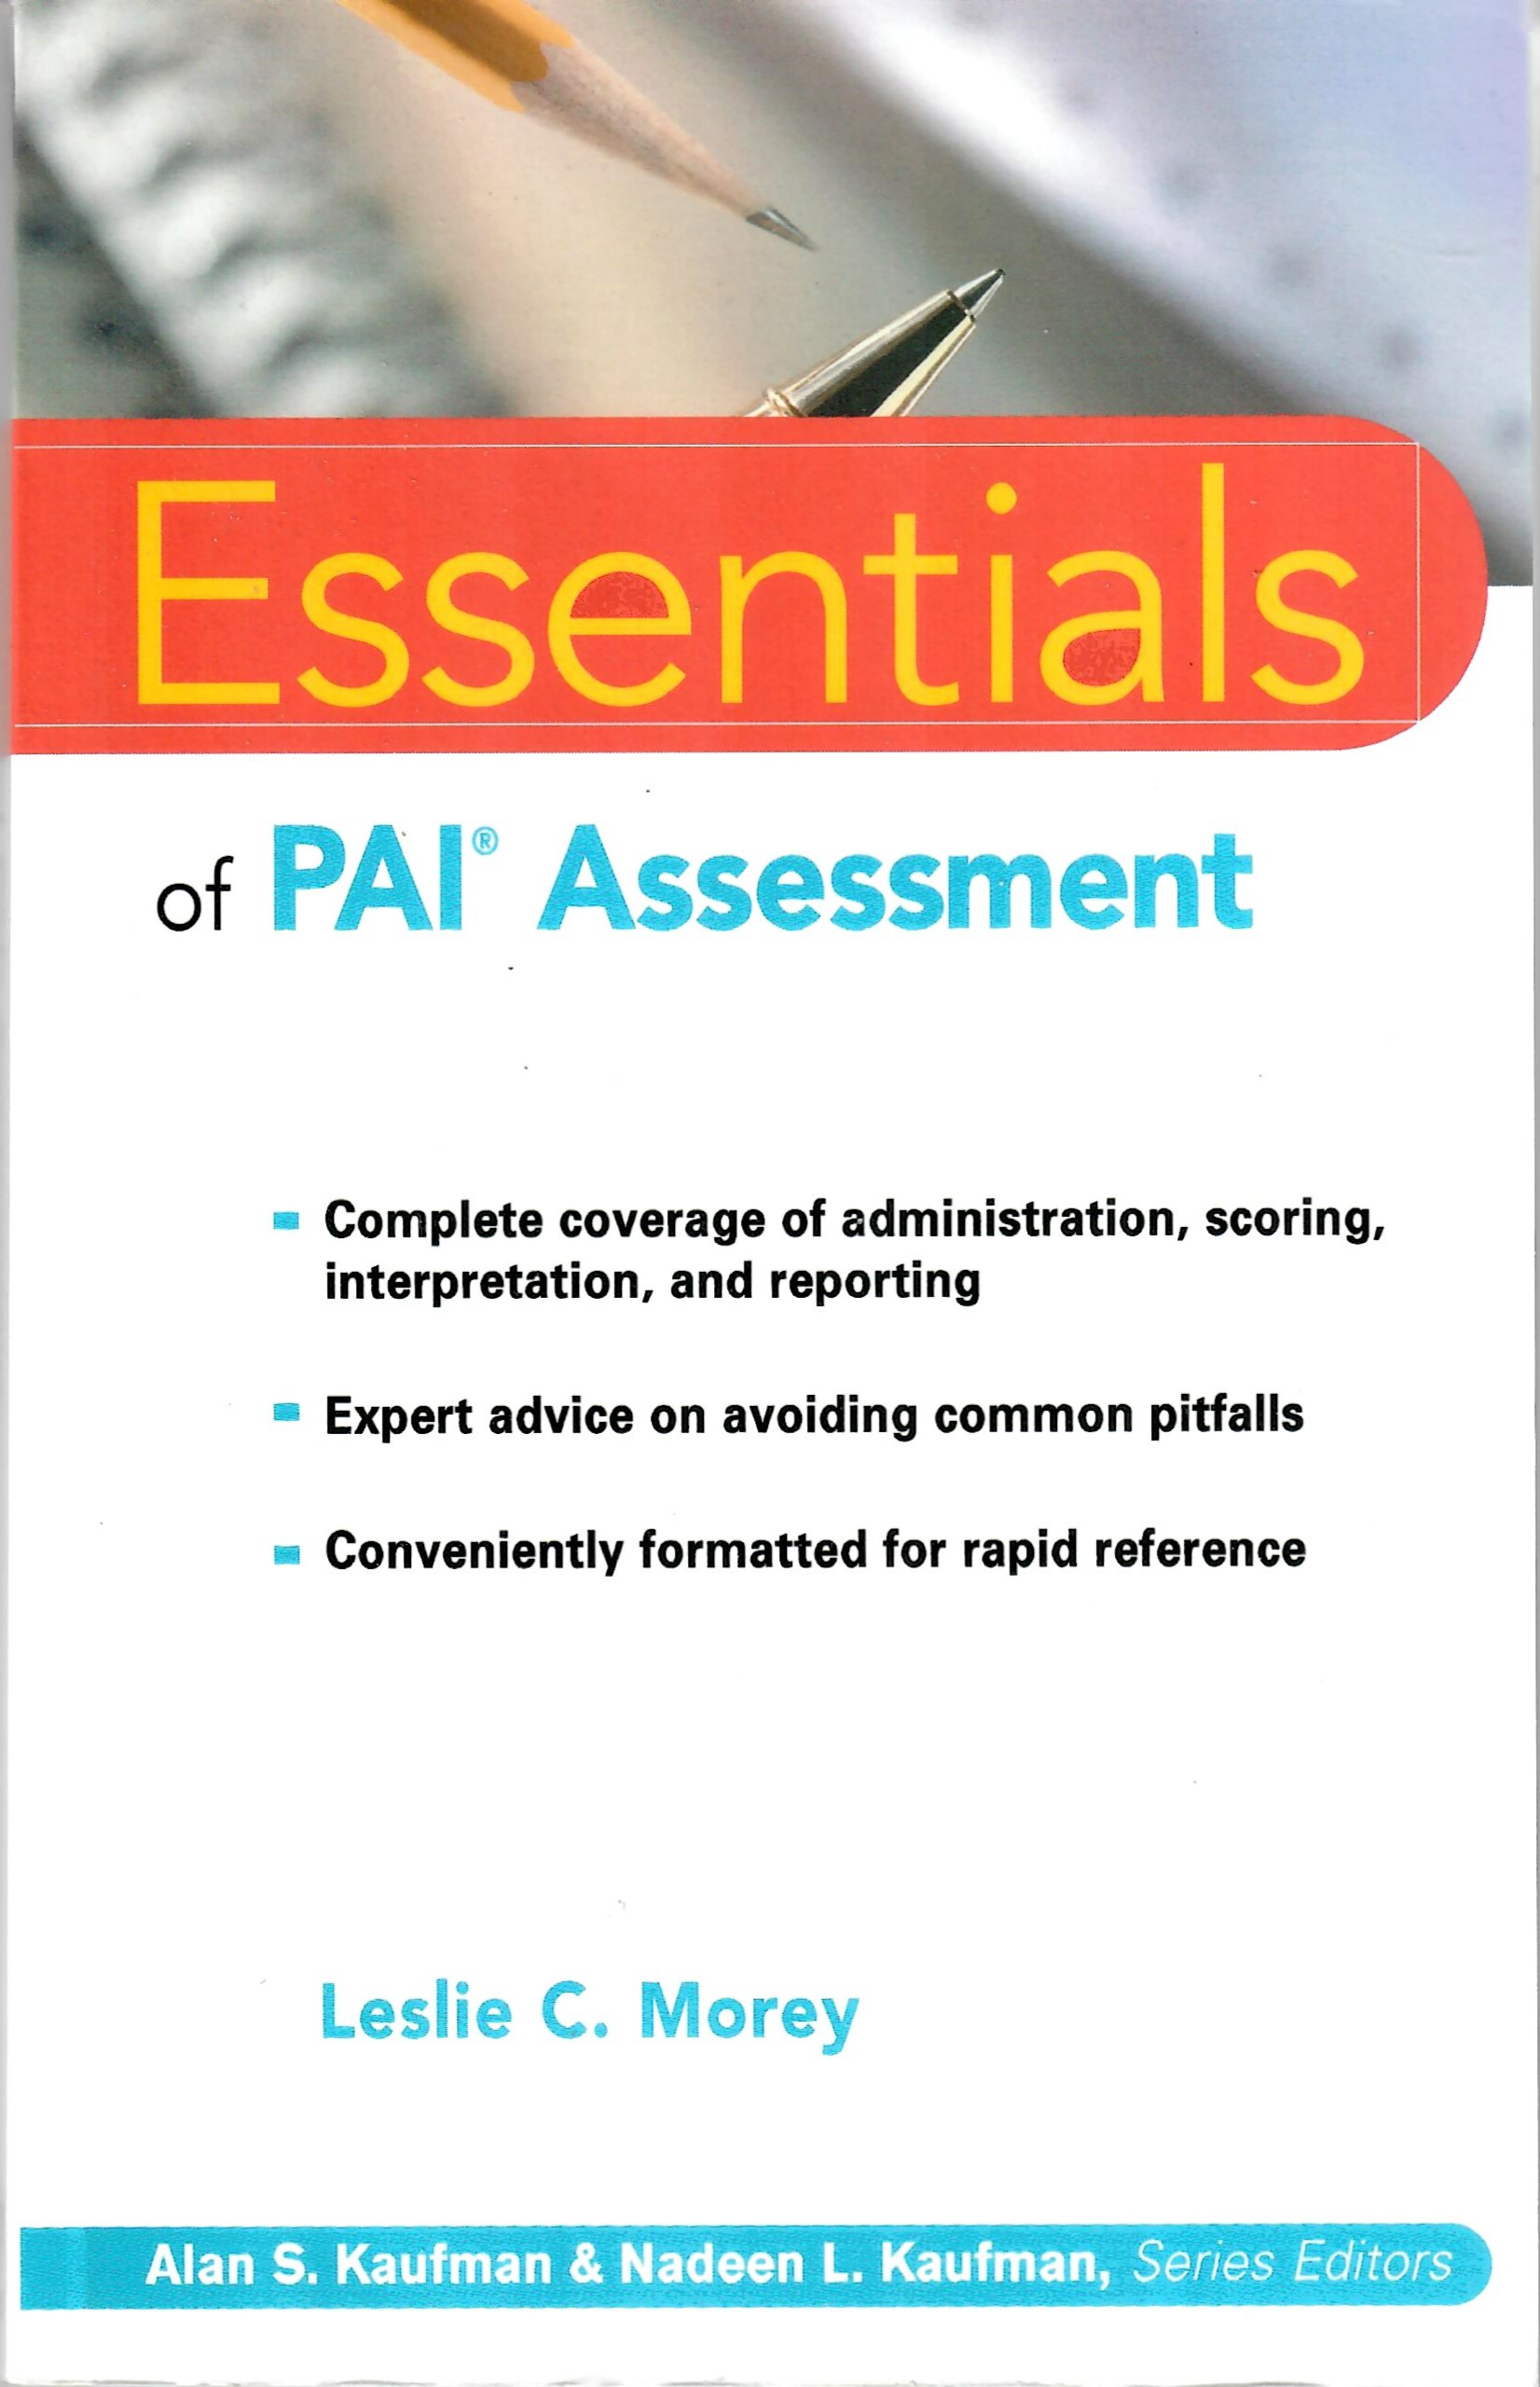 Essentials of the Personality Assessment Inventory